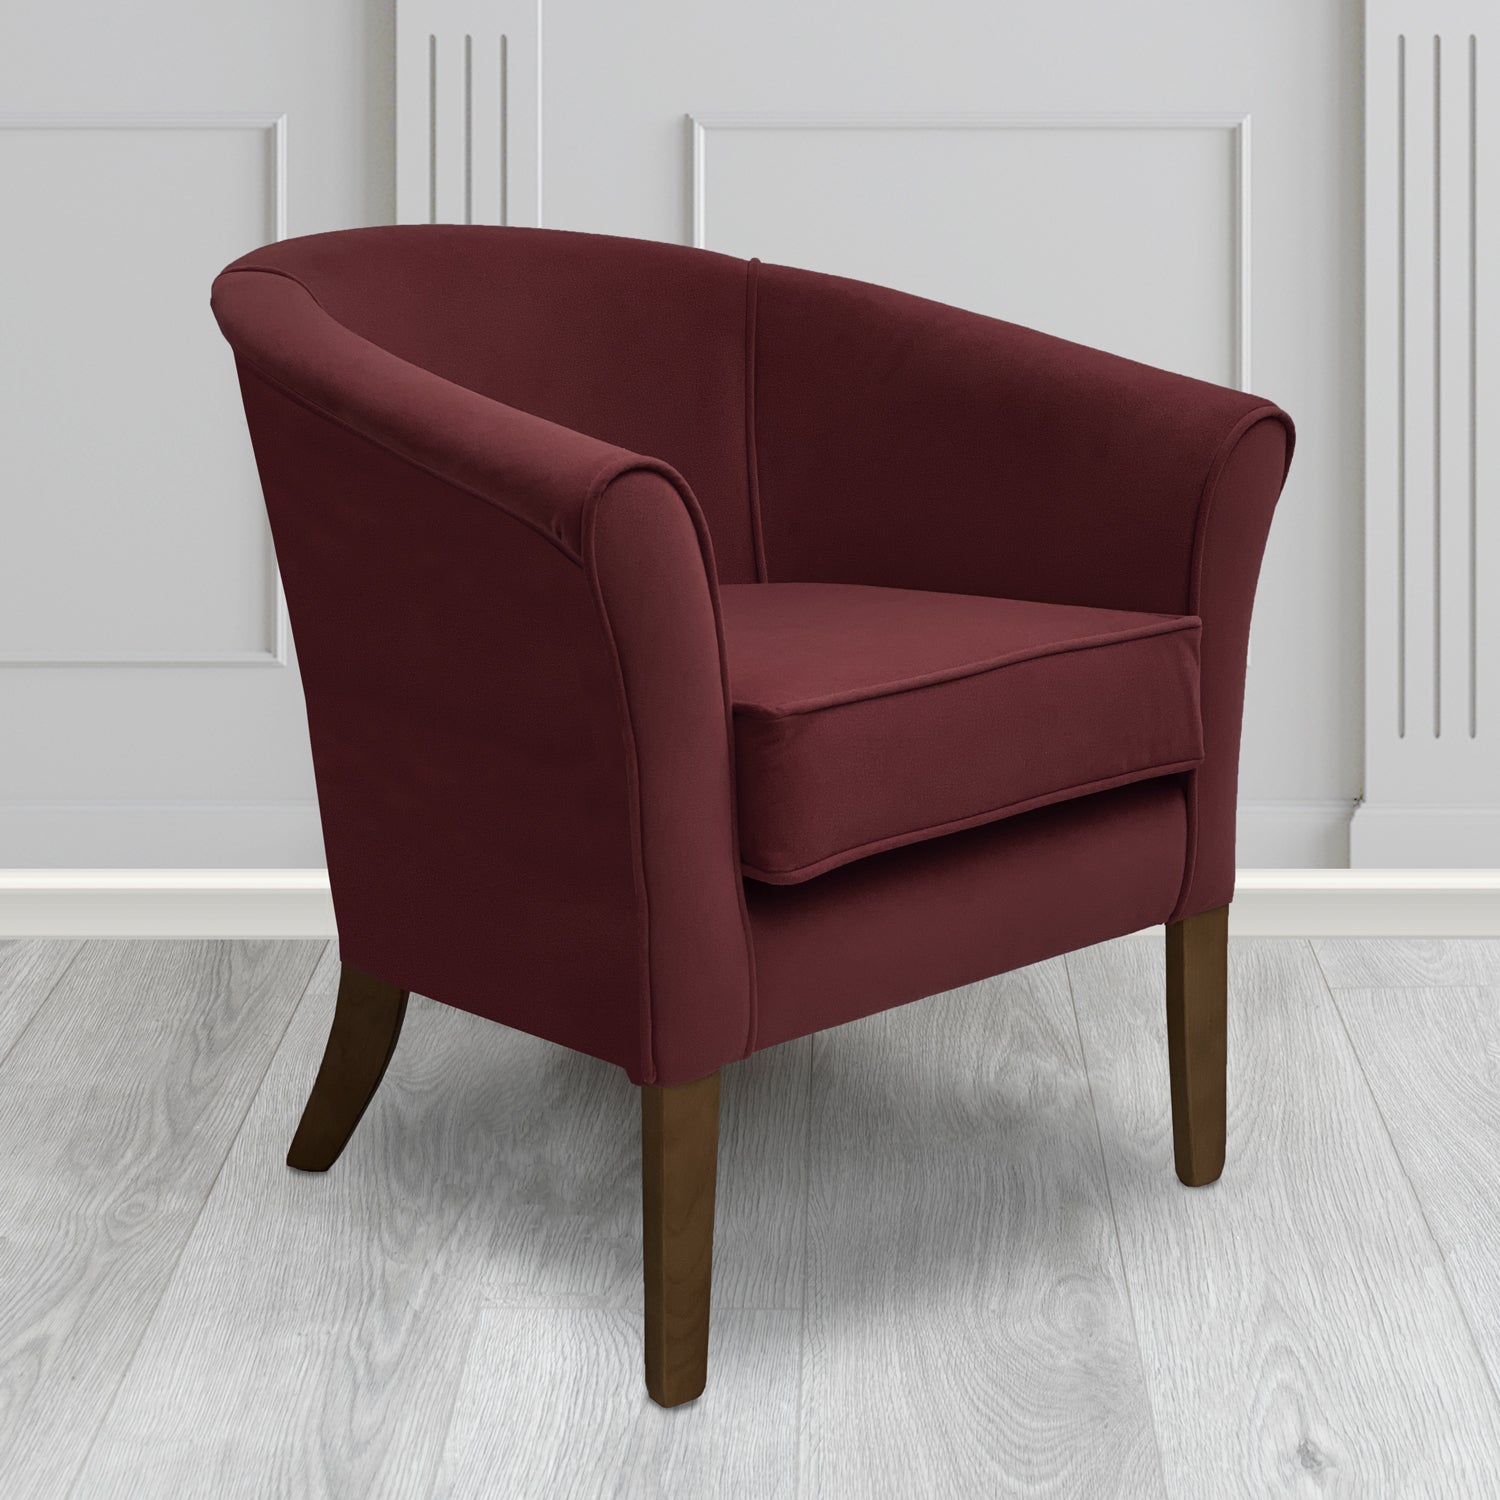 Aspen Tub Chair in Noble 414 Wine Crib 5 Velvet Fabric - Water Resistant - The Tub Chair Shop